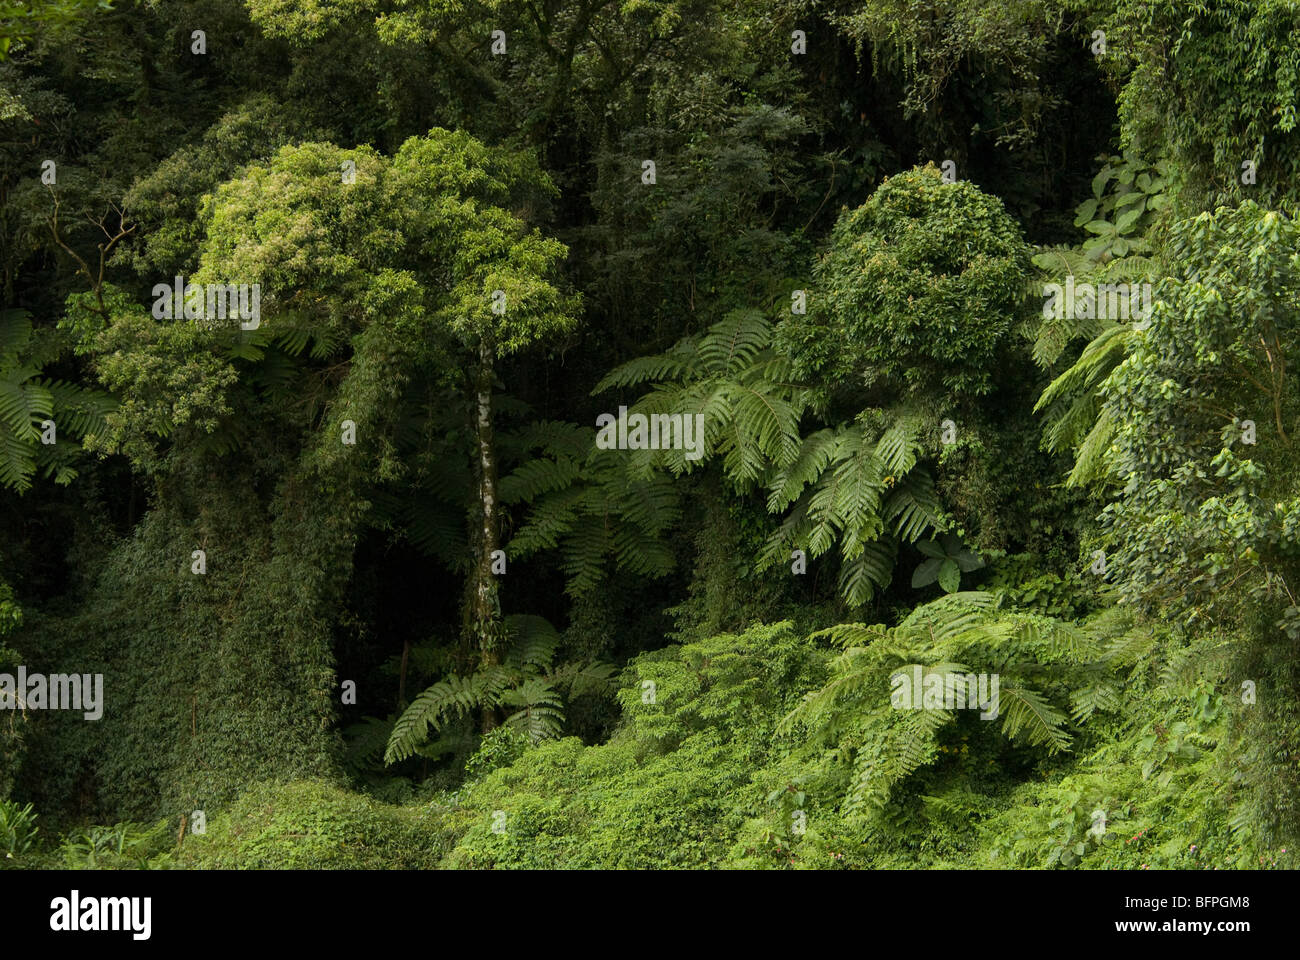 Rainforest profile featuring trees, ferns, vines and creepers, Atlantic Rainforest, Southern Brazil Stock Photo